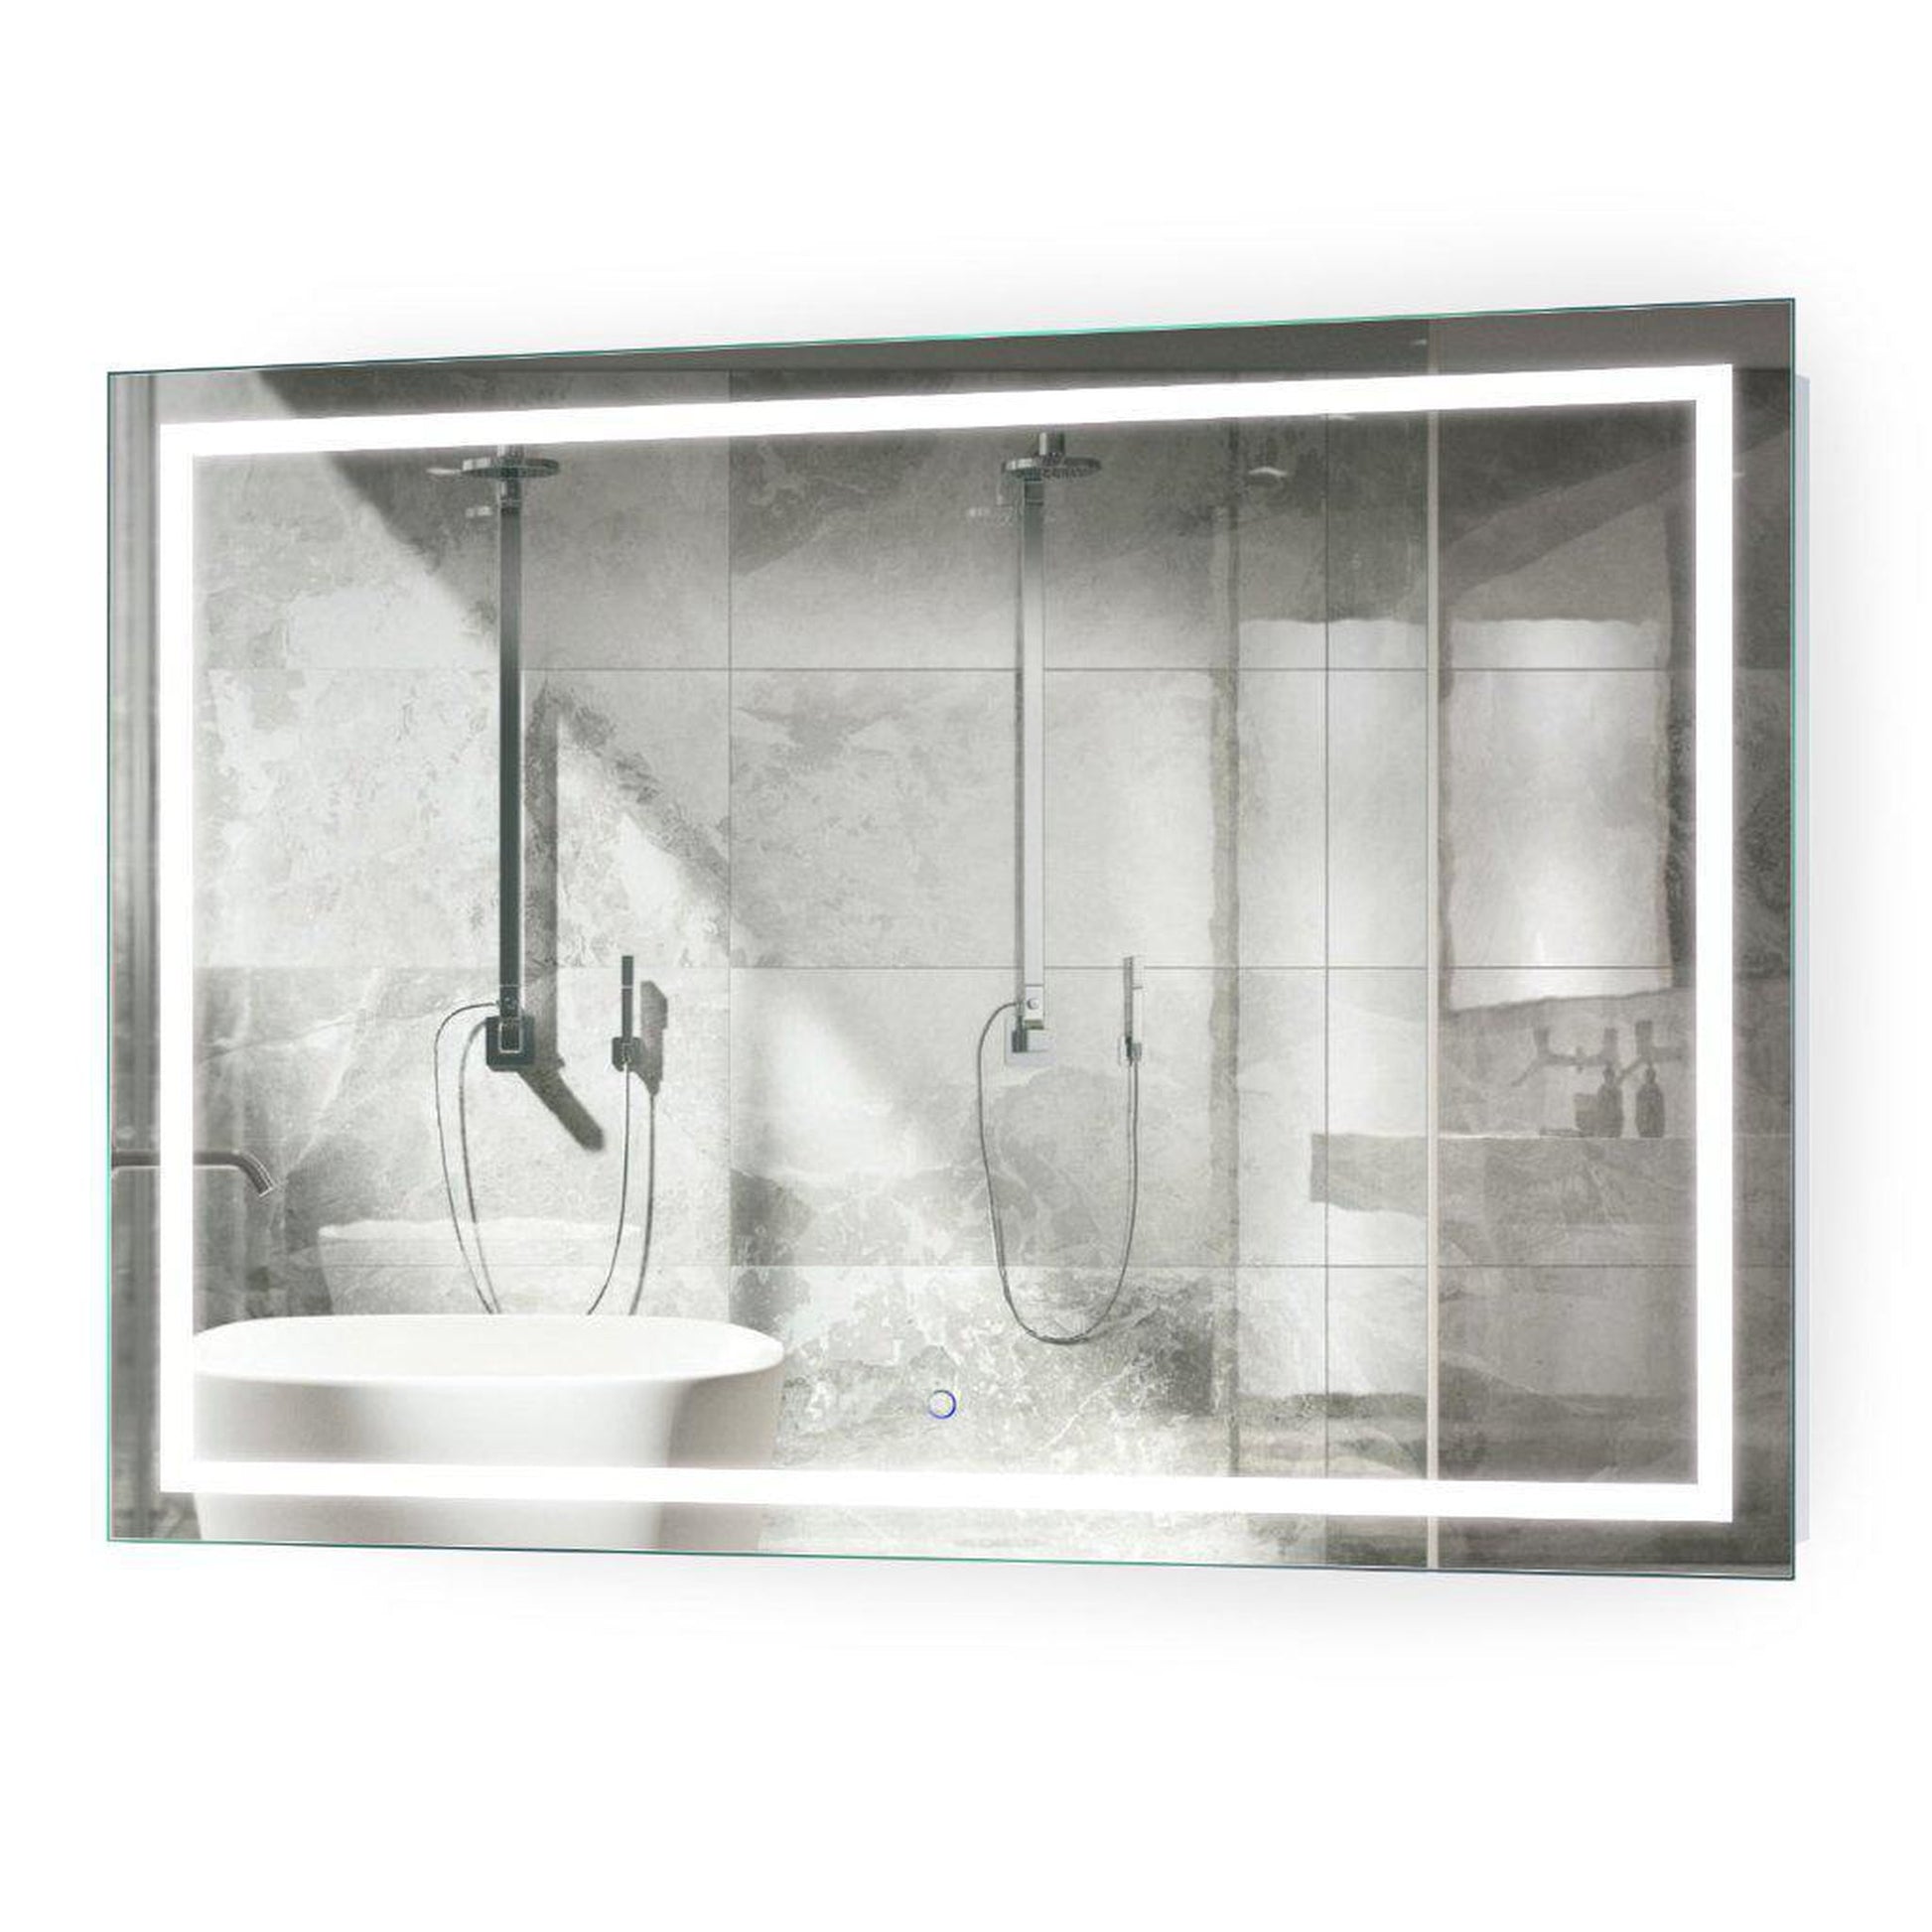 Krugg Reflections Icon 48” x 36” 5000K Rectangular Wall-Mounted Illuminated Silver Backed LED Mirror With Built-in Defogger and Touch Sensor On/Off Built-in Dimmer